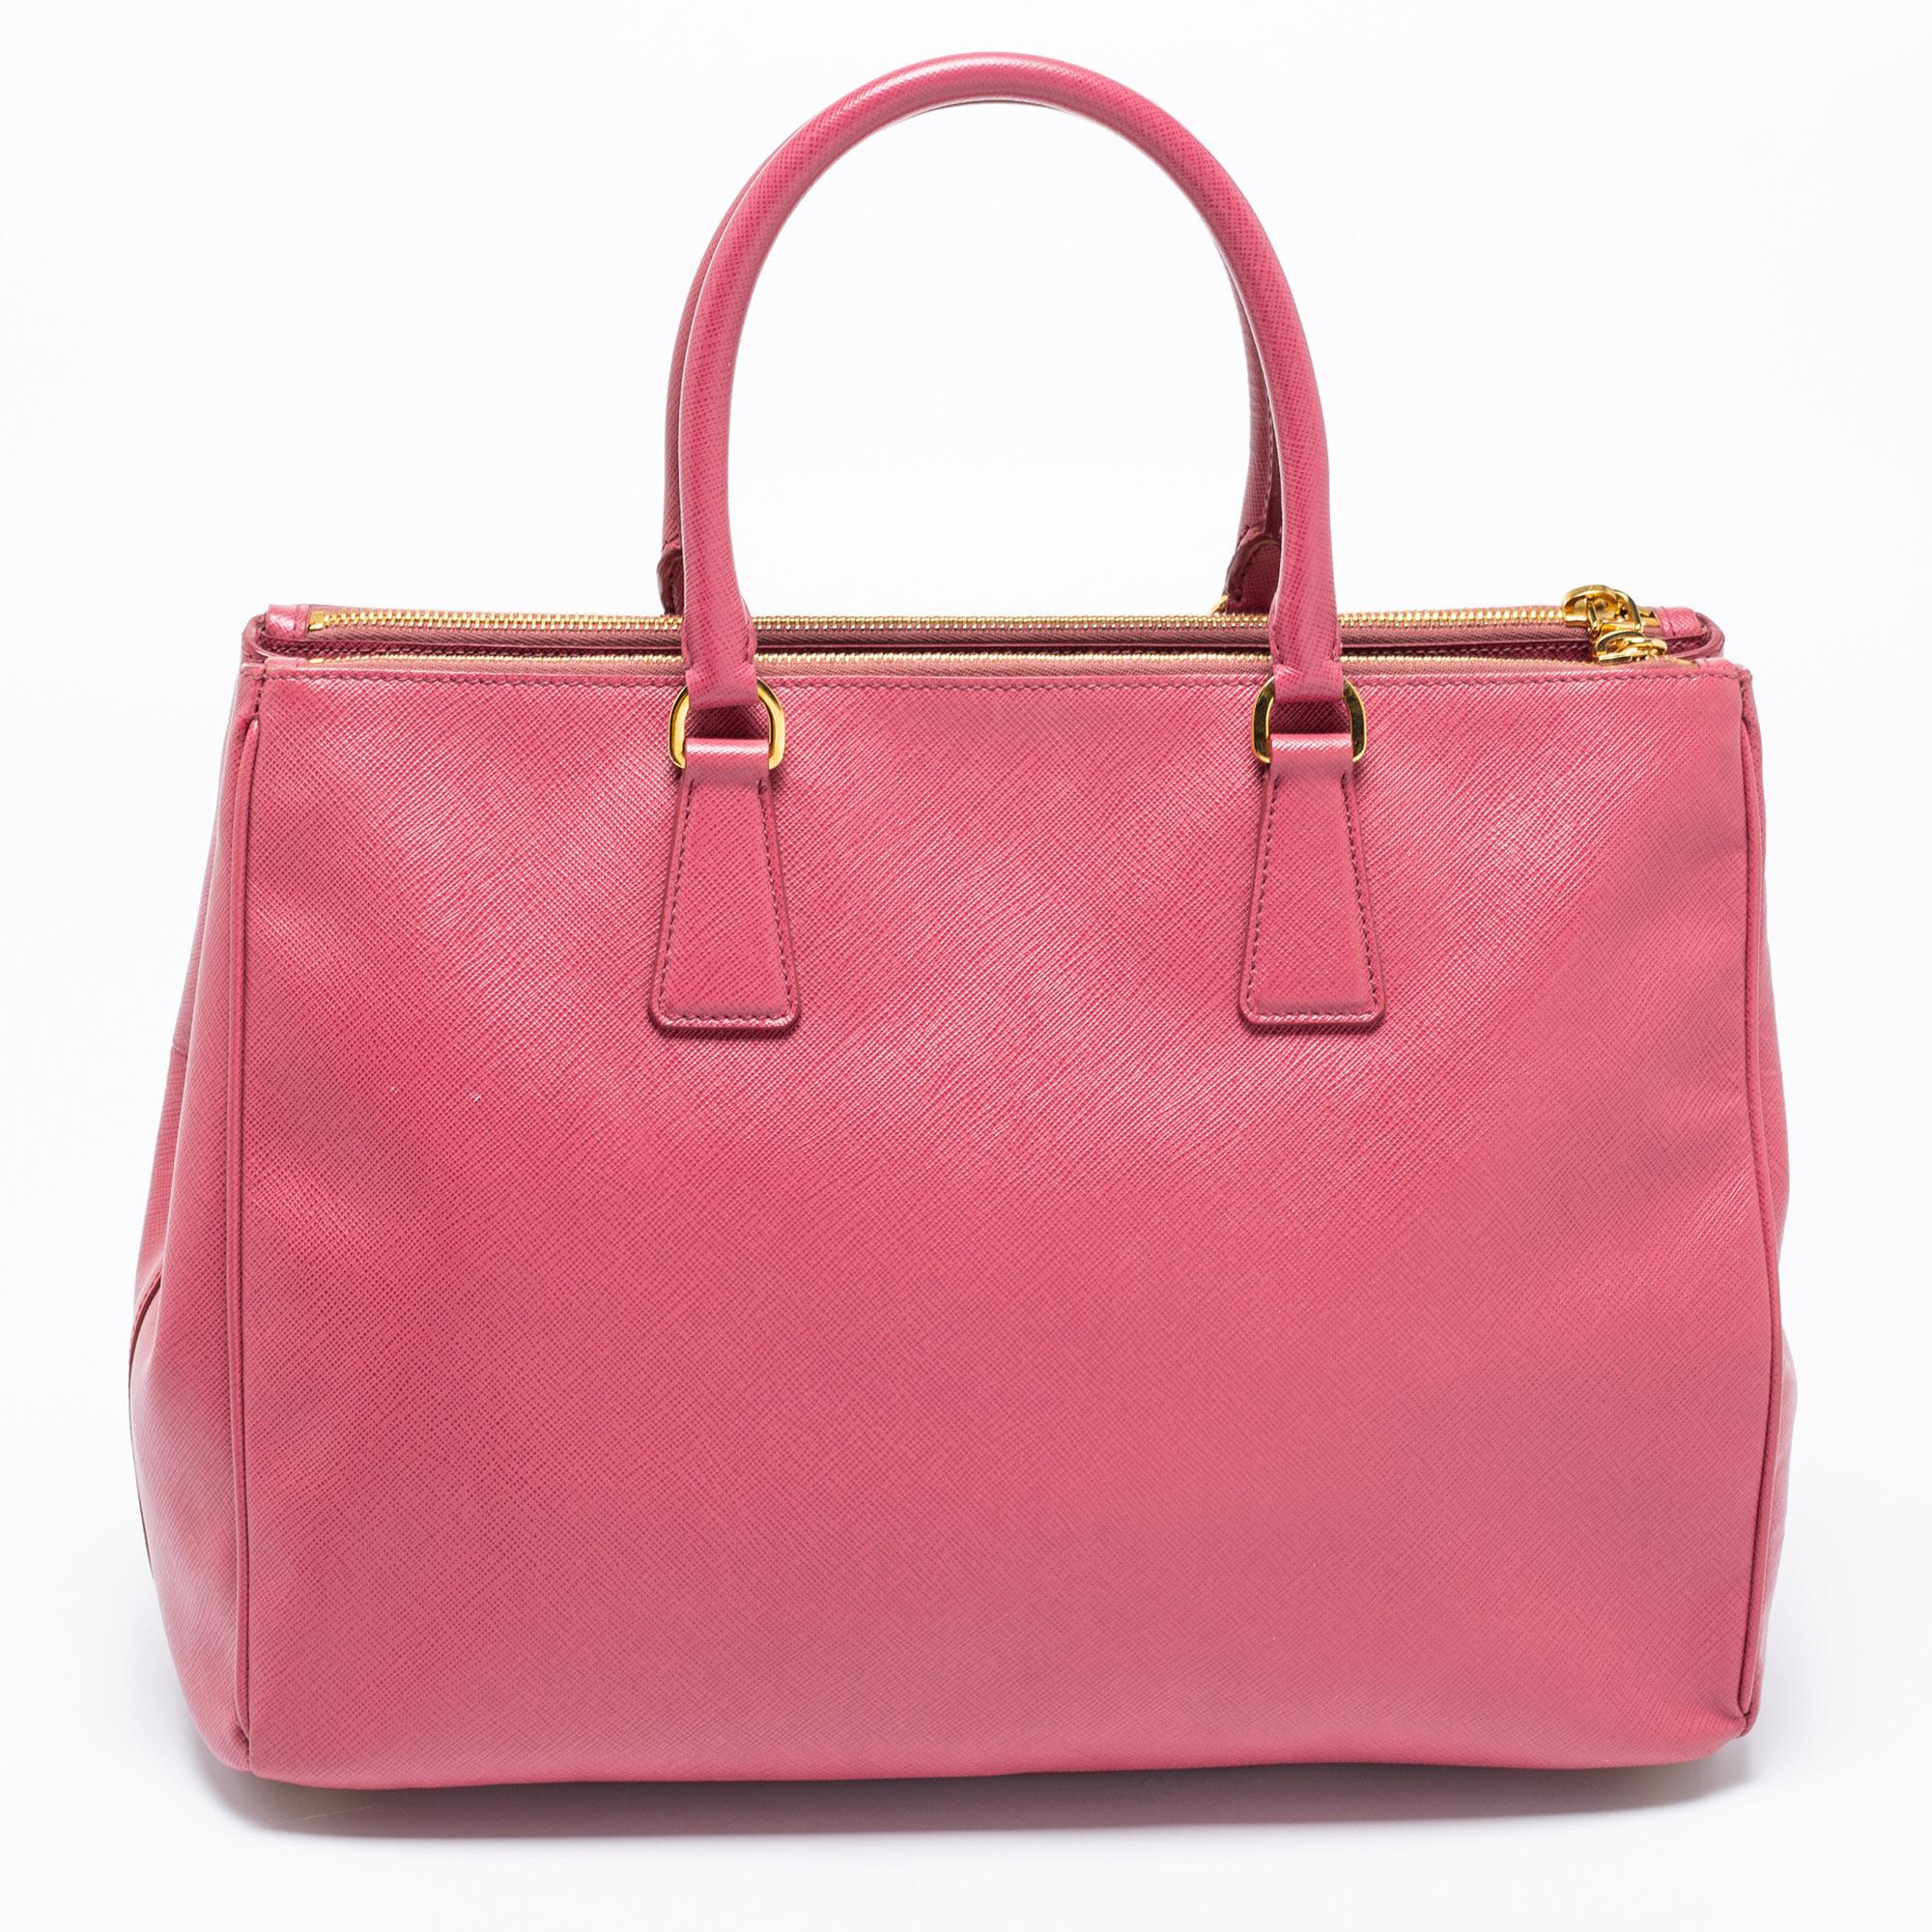 This Double Zip tote by Prada will be a loved addition to your closet. It has been crafted from pink Saffiano Lux leather and added with gold-tone hardware, two top handles, and nylon compartments. The bag is complete with protective metal feet and